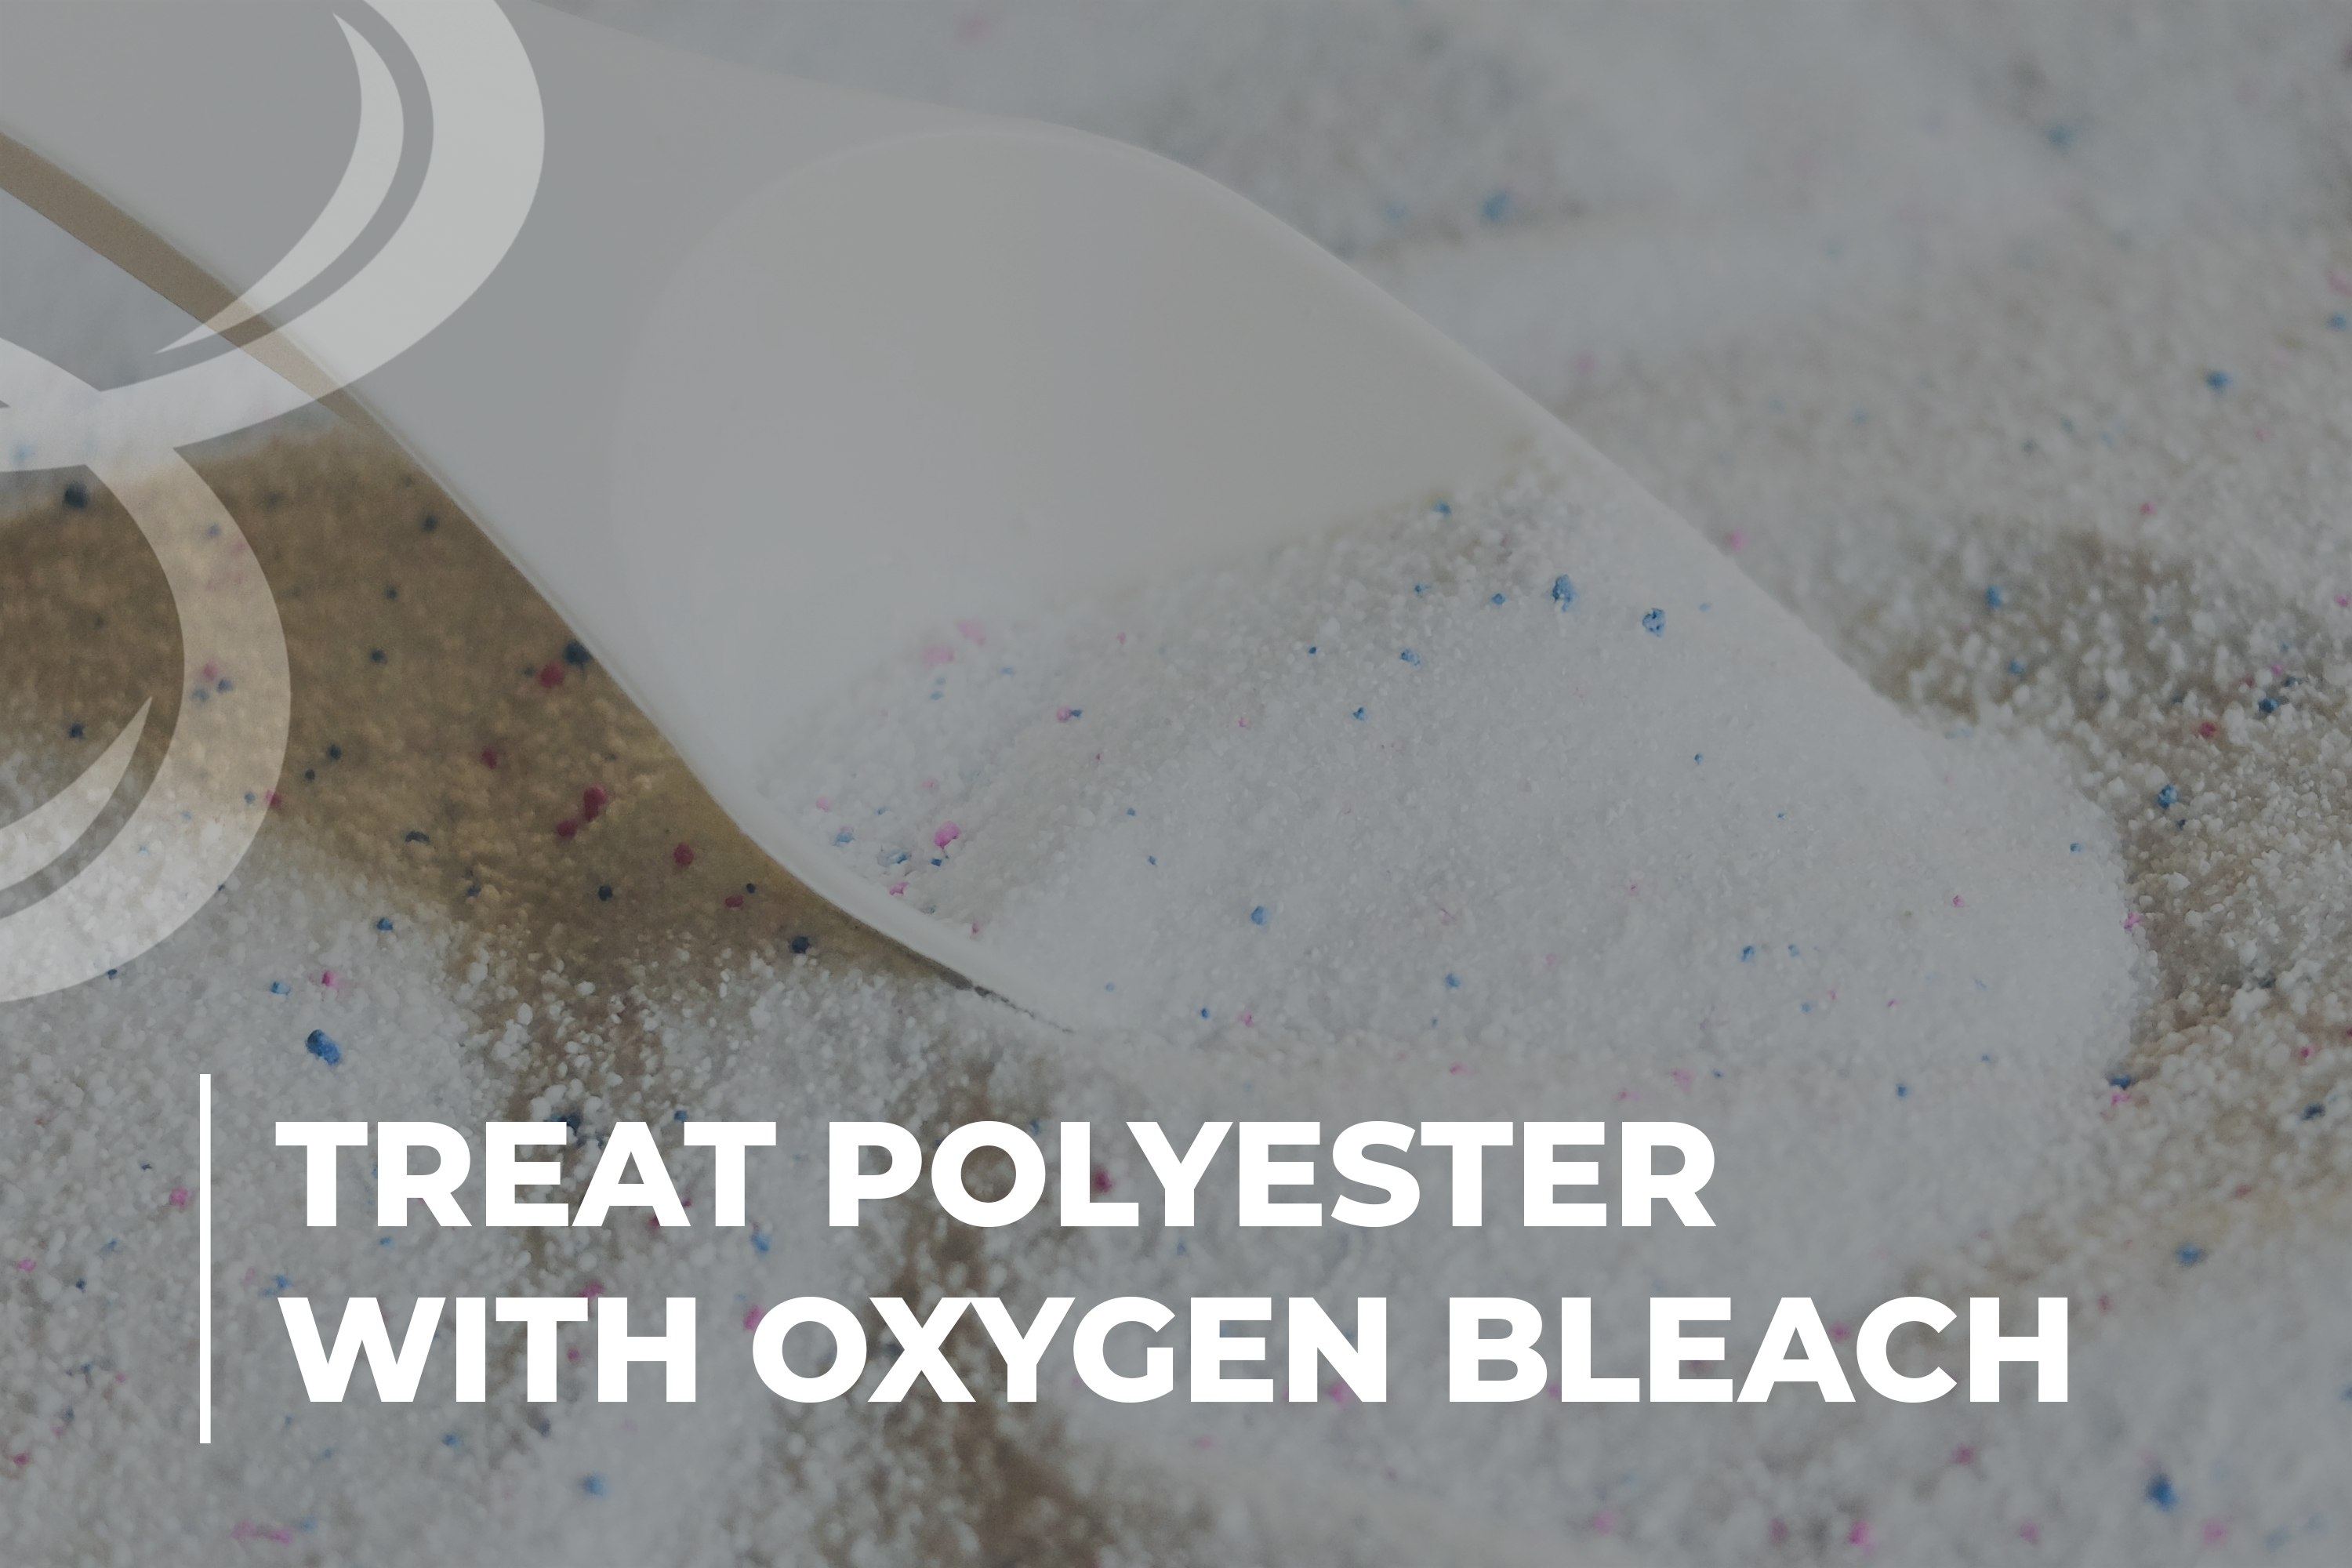 Treat polyester with oxygen bleach